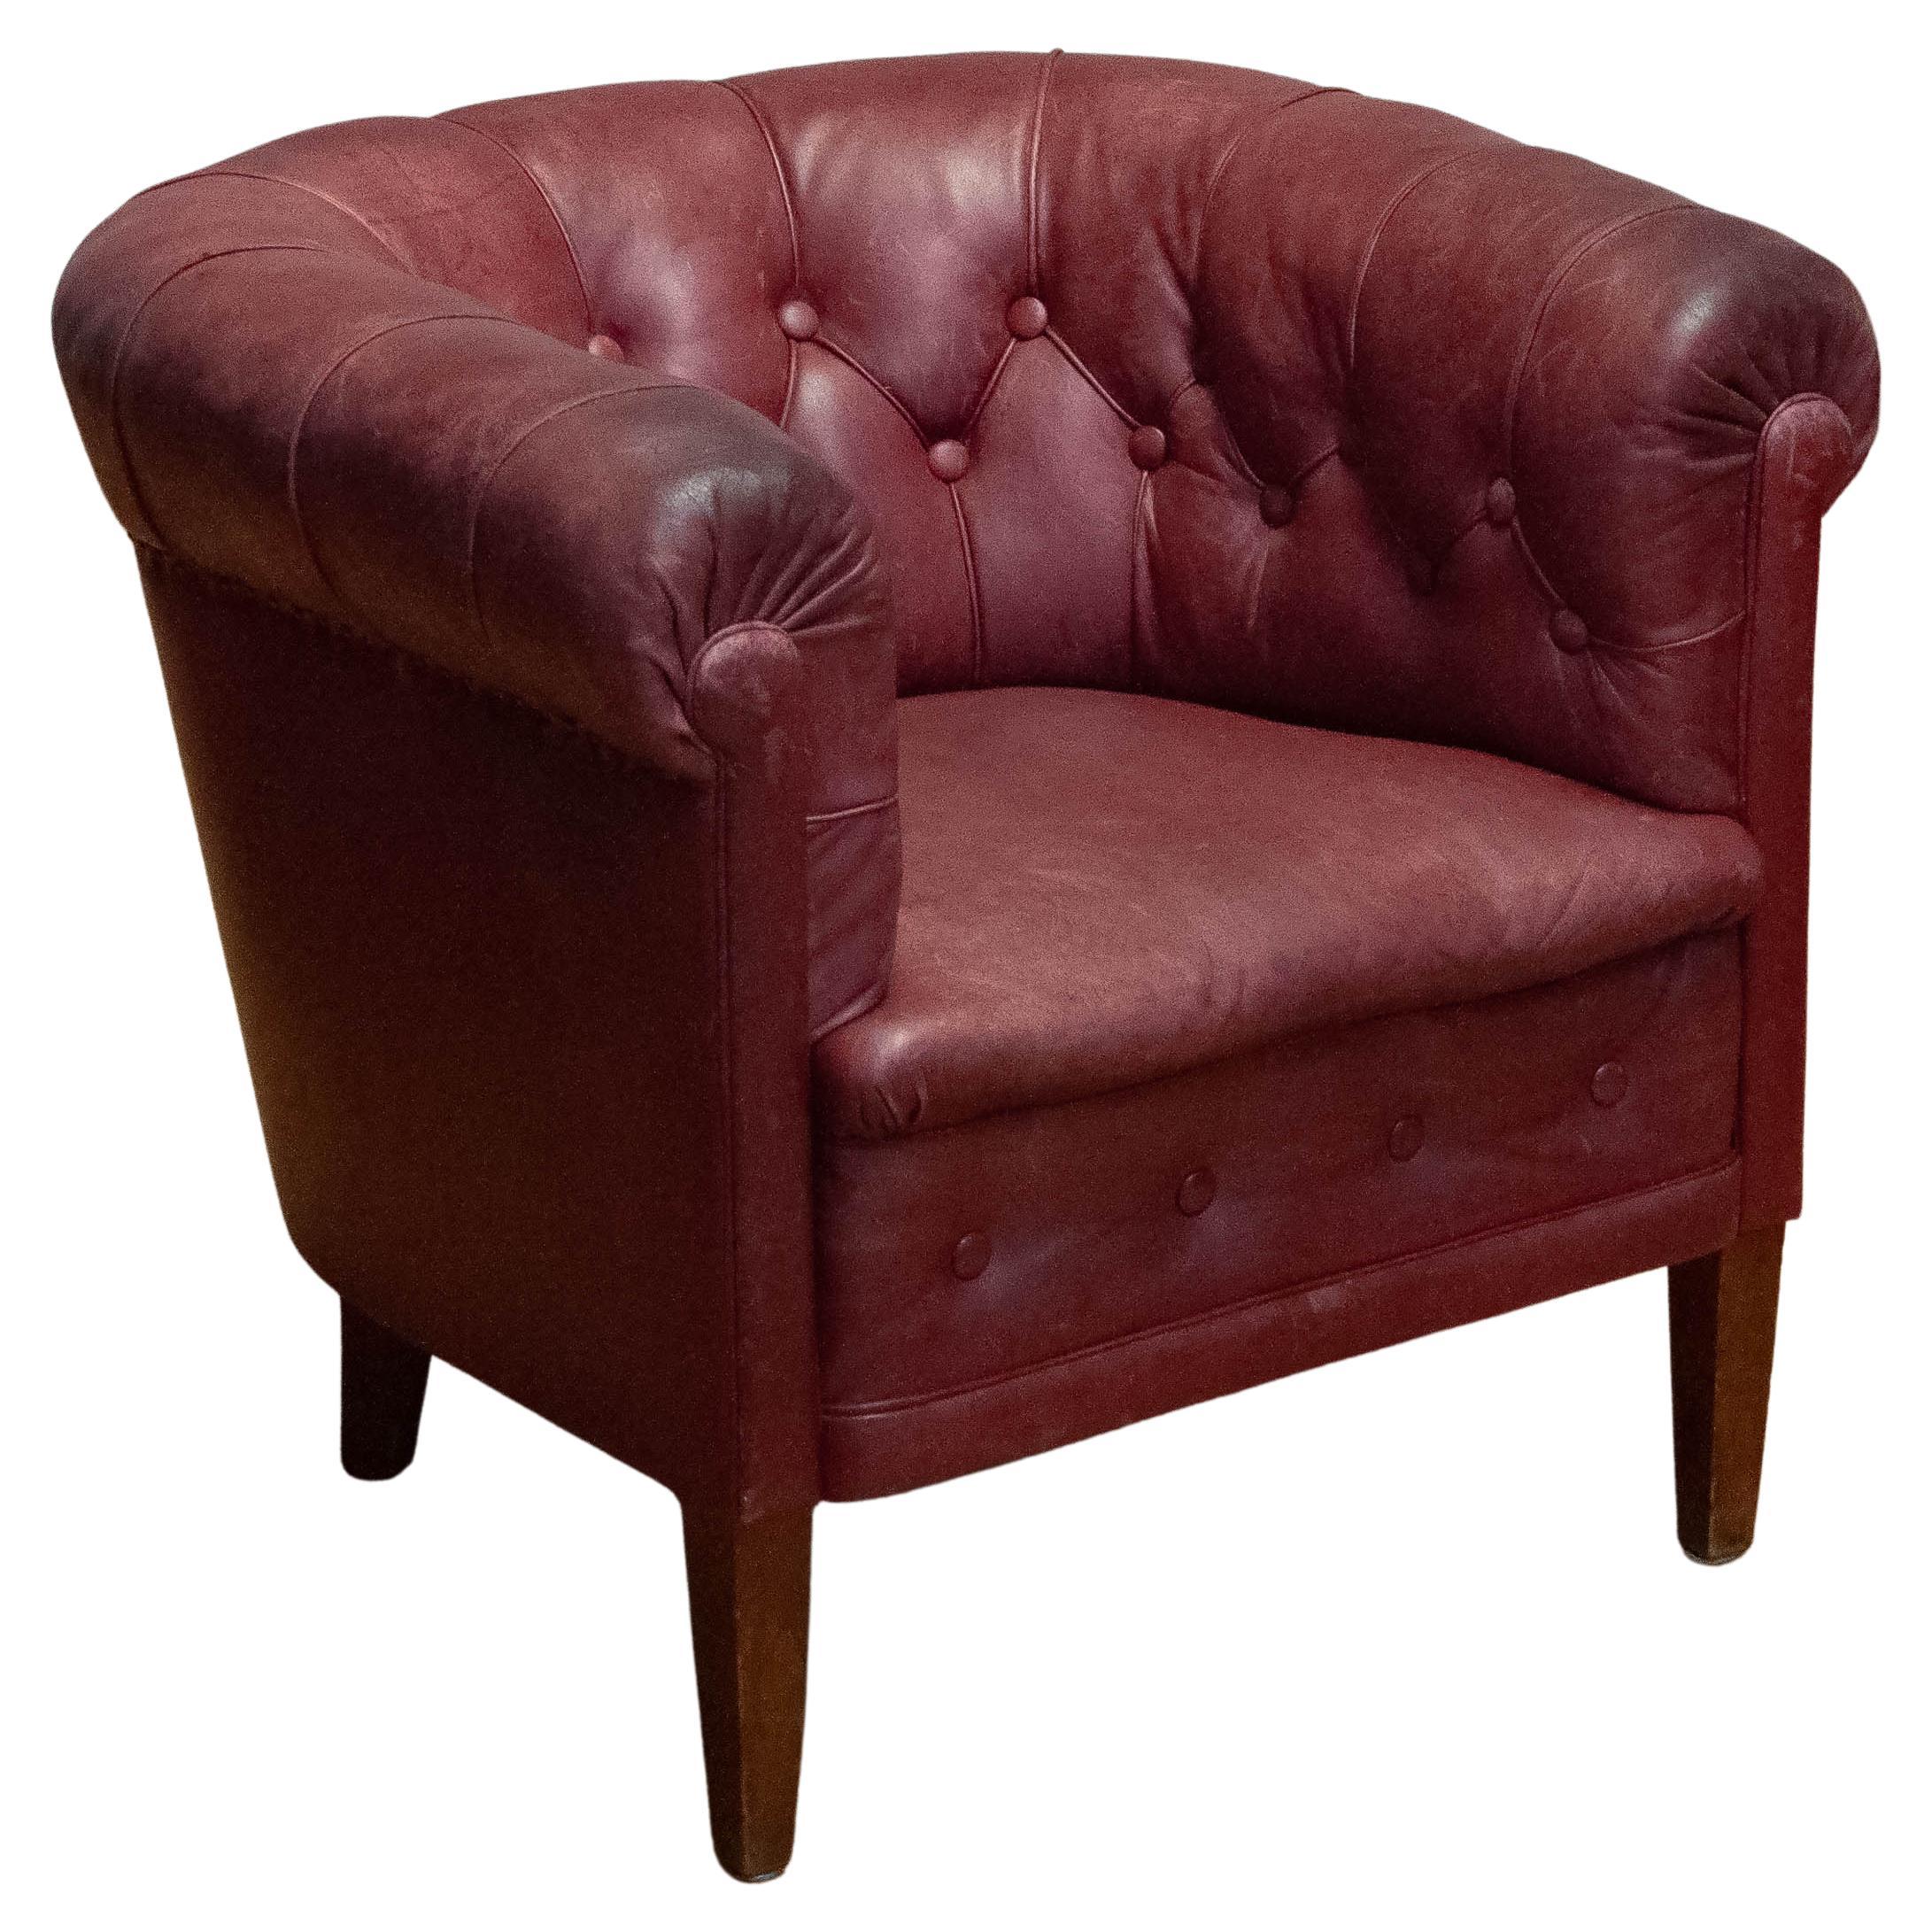 1930s Swedish Crimson Red Chesterfield Club Chair in Patinated Leather For Sale